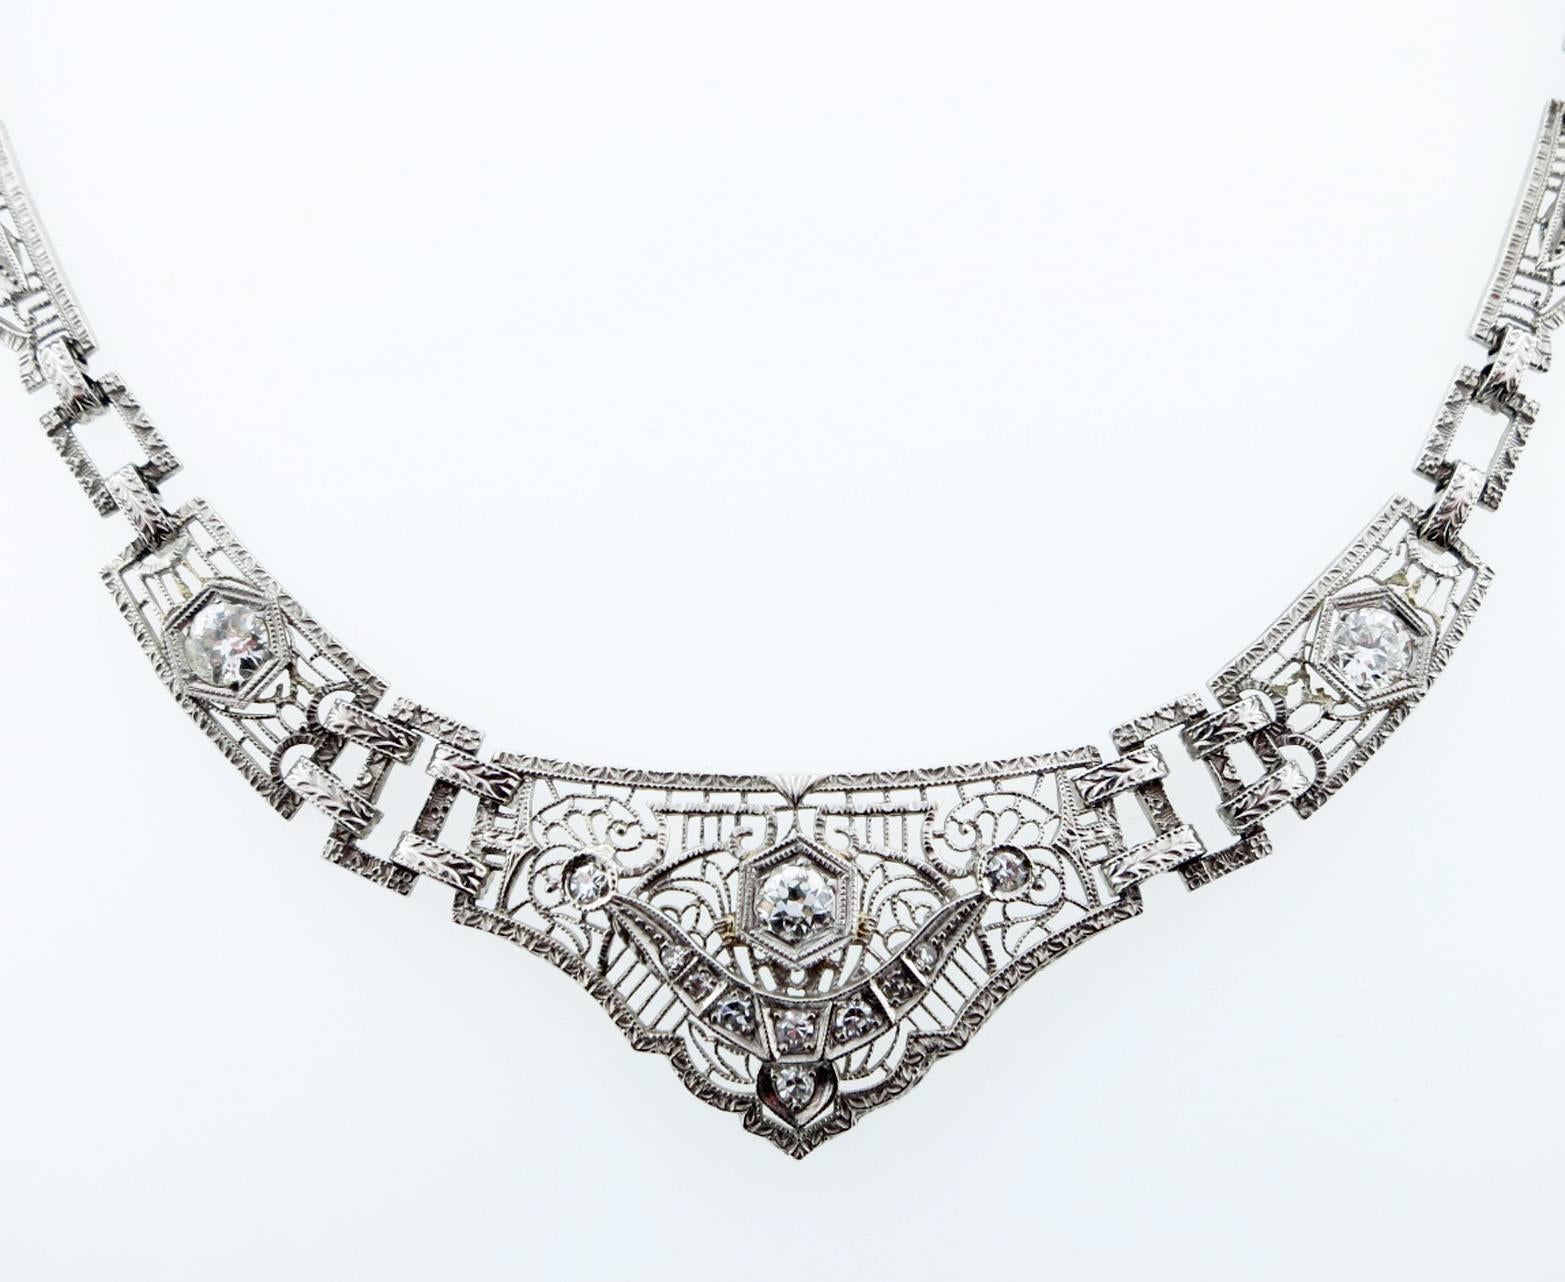 Pretty open filigree necklace in platinum and 14kt. white gold measuring 16 inches in length. The front of the necklace is set 13 round old European cut diamonds totaling approx .60cts. Hidden catch. Circa 1925.